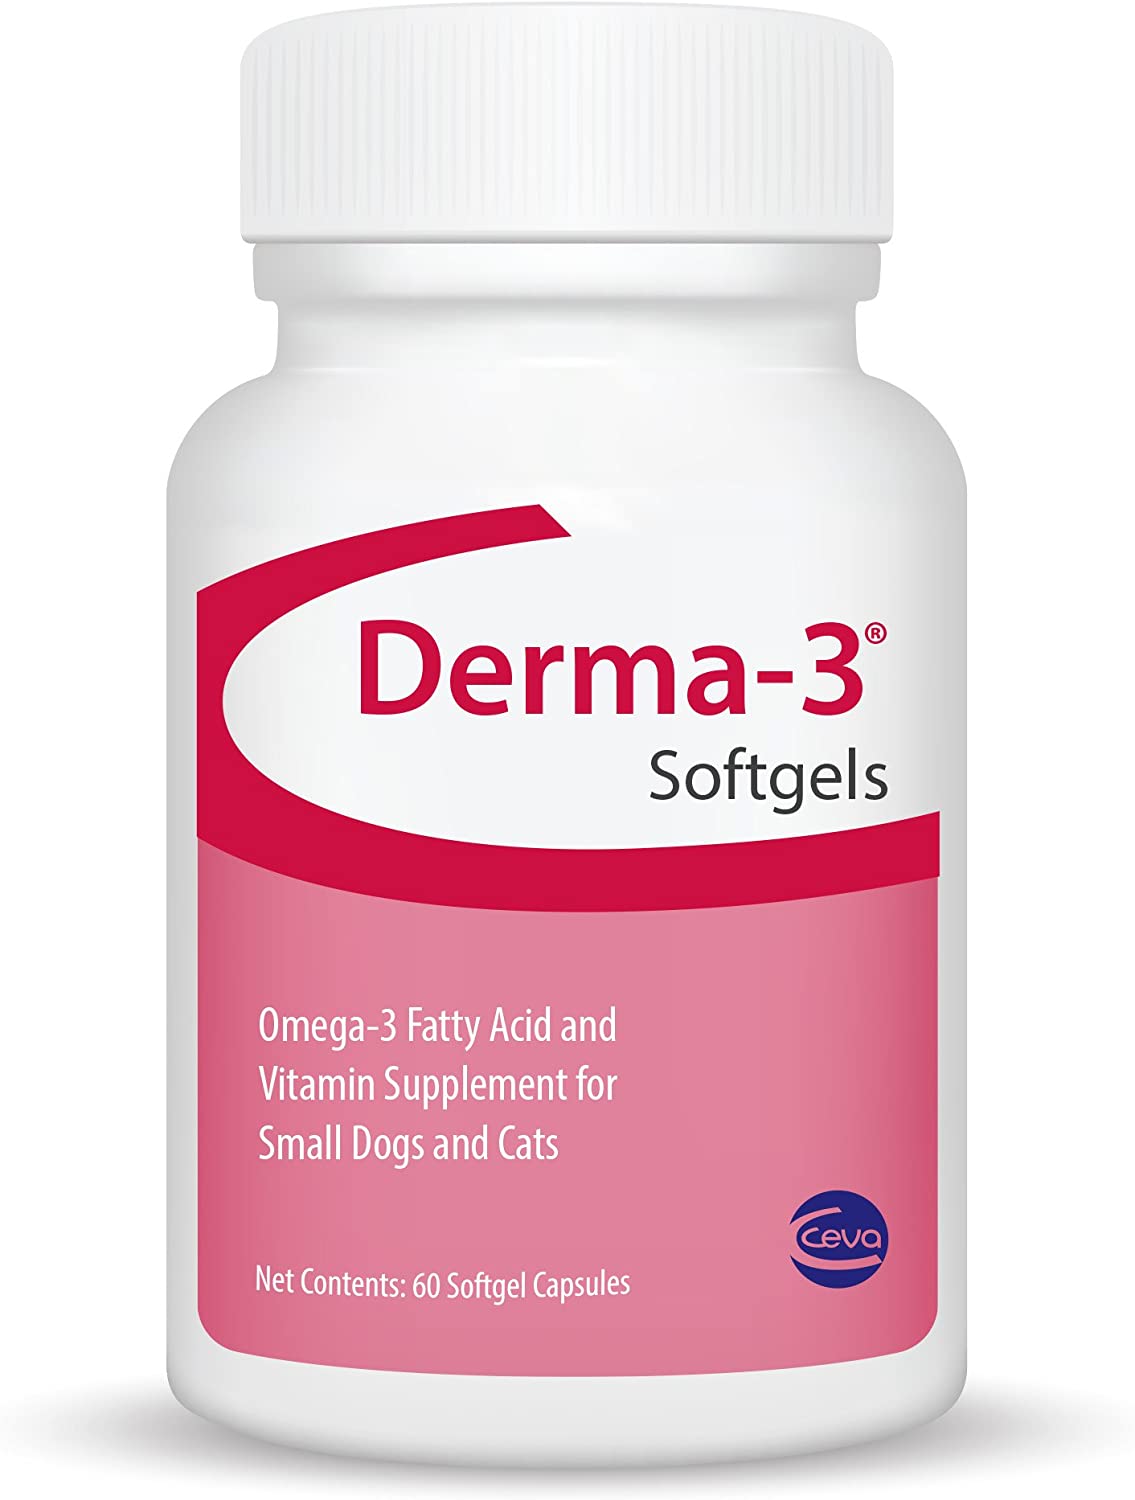 Derma -3 Softgels for Dogs and Cats